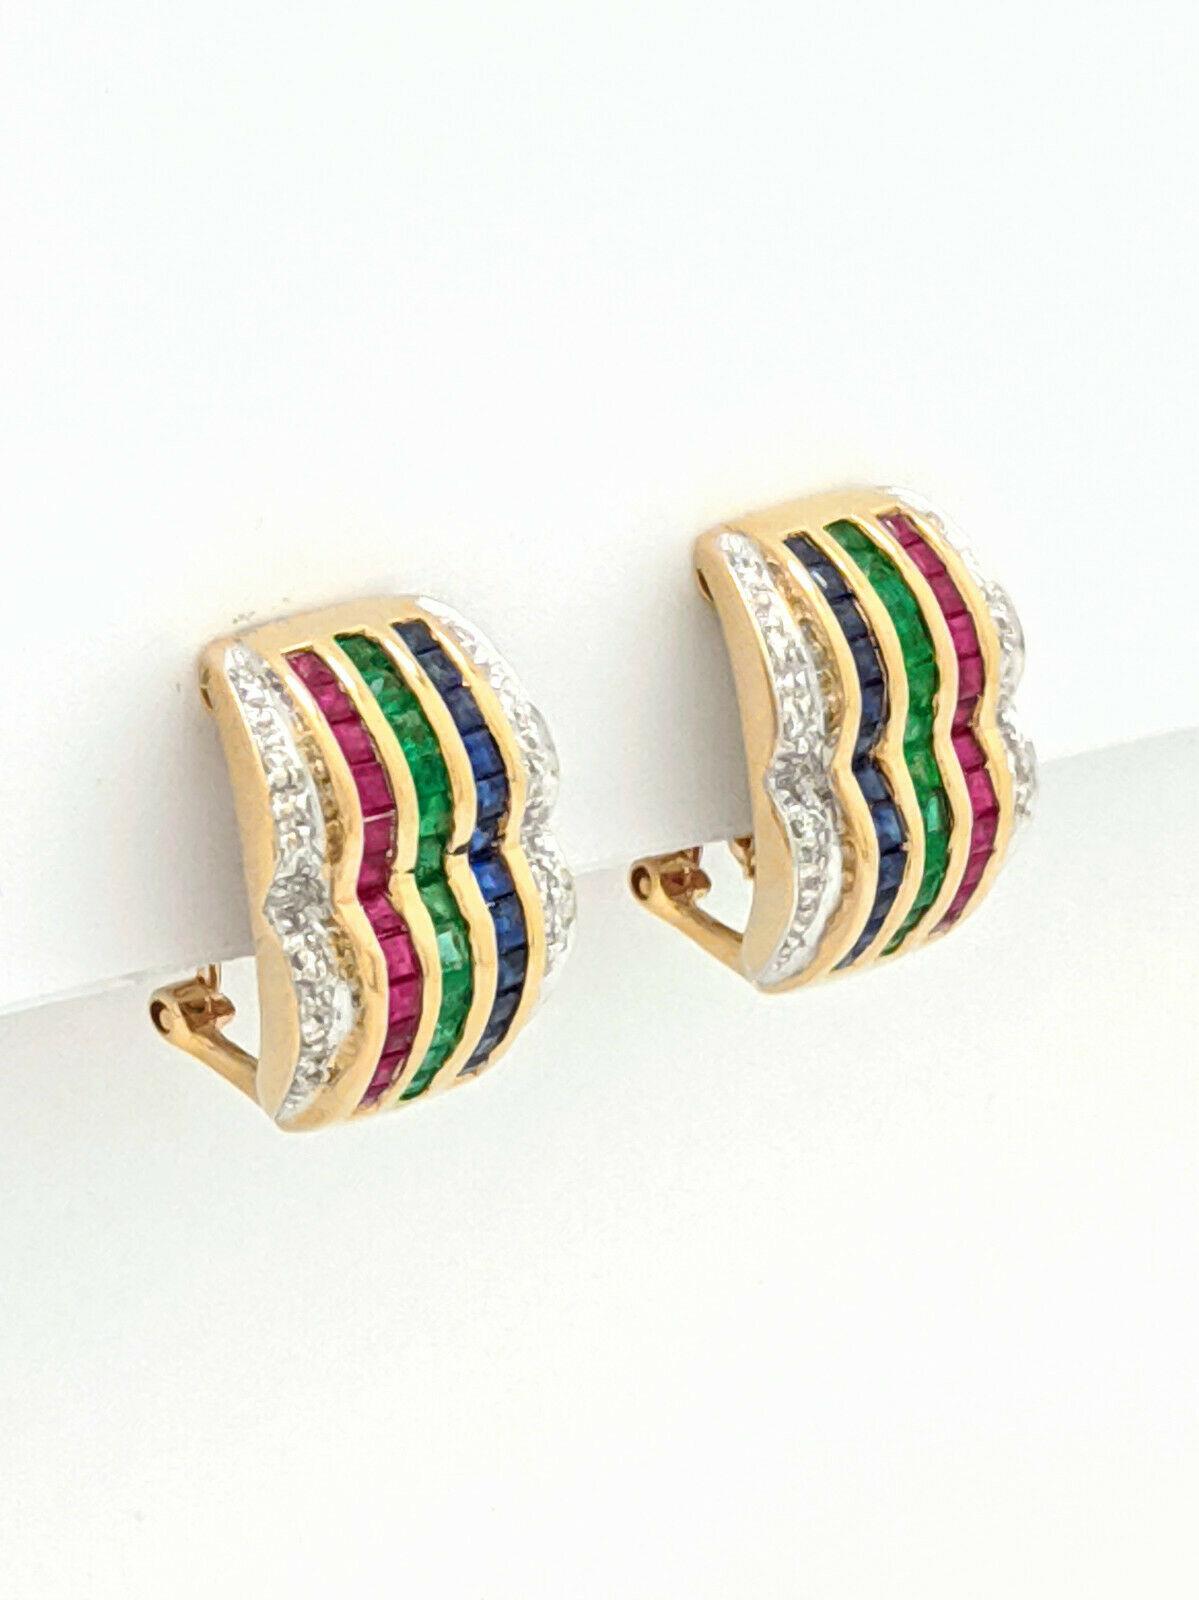 14 Karat Yellow Gold Diamond Sapphire Emerald Ruby Hoop Earrings In Good Condition For Sale In Gainesville, FL